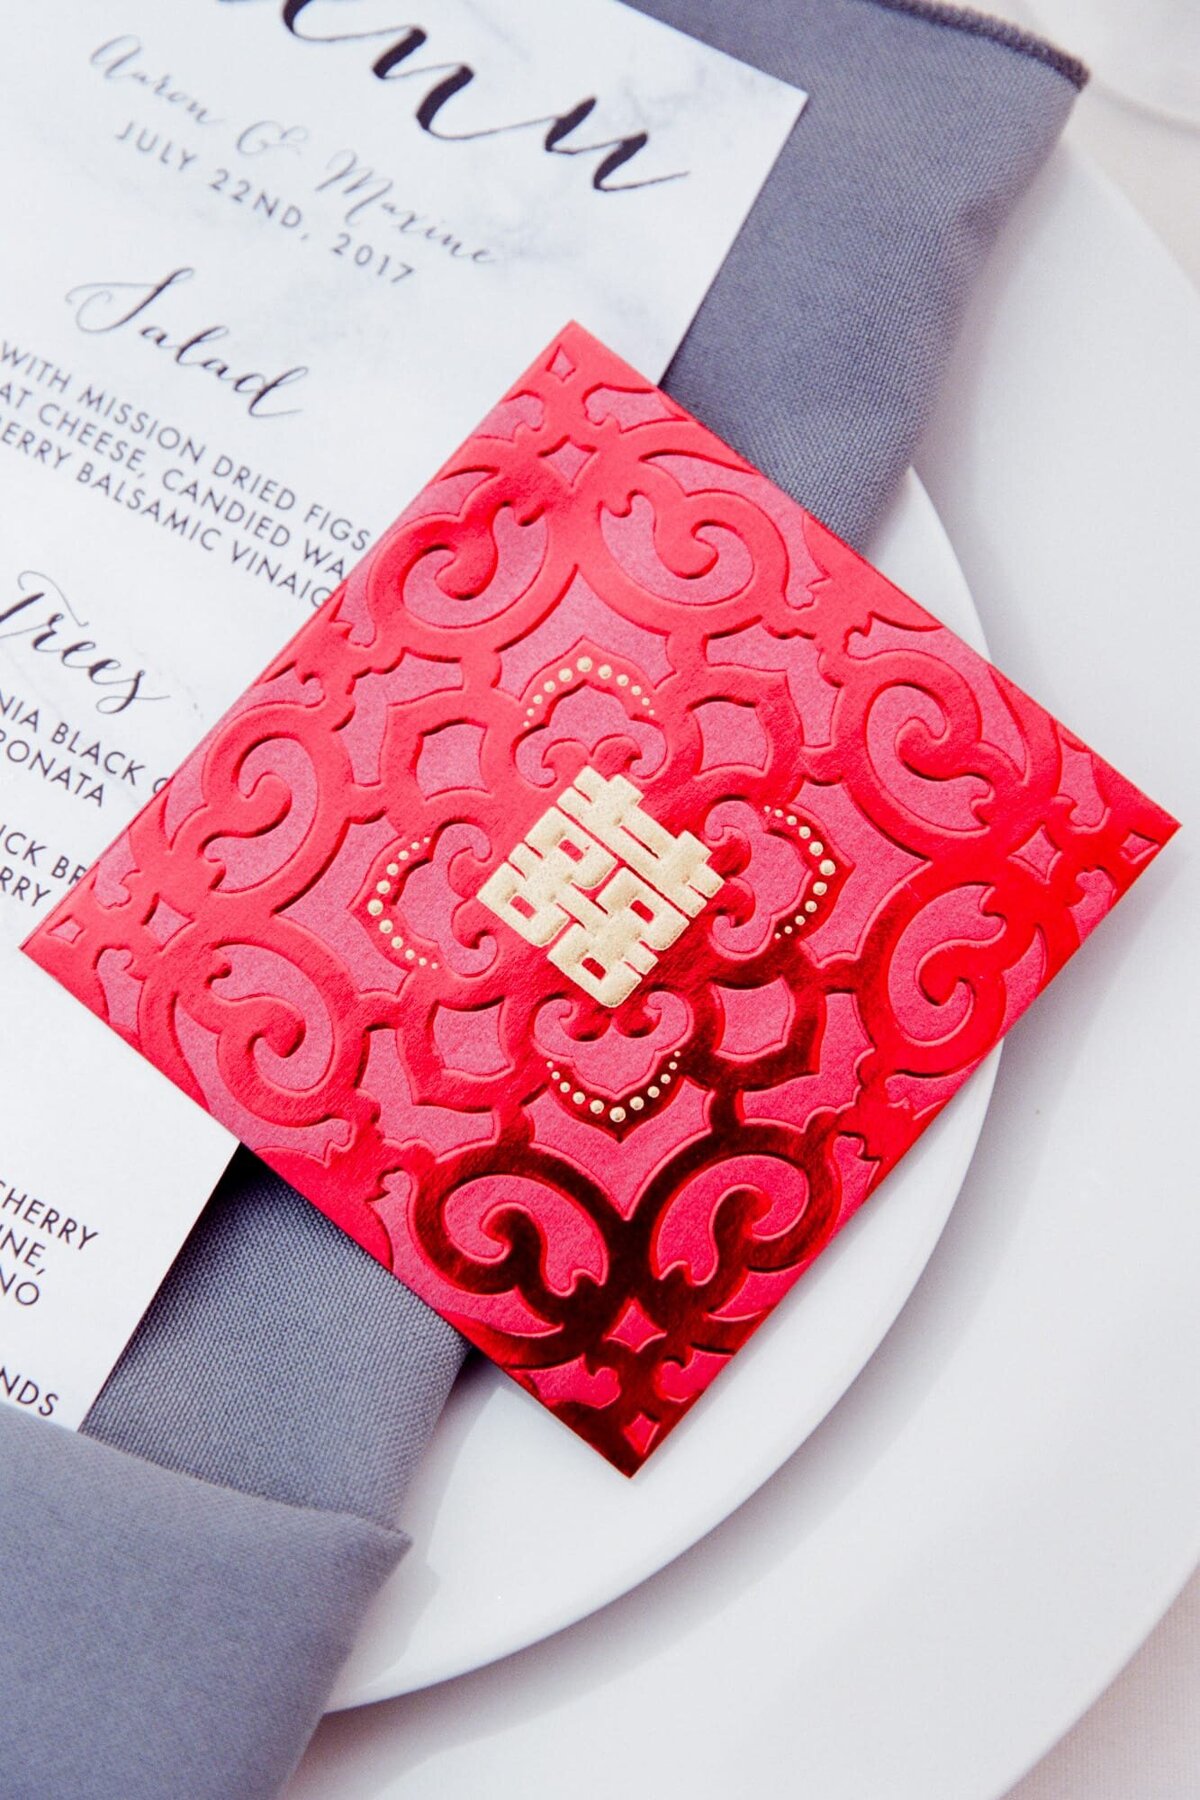 Wedding reception menu with a red card typical of Asian cultures.